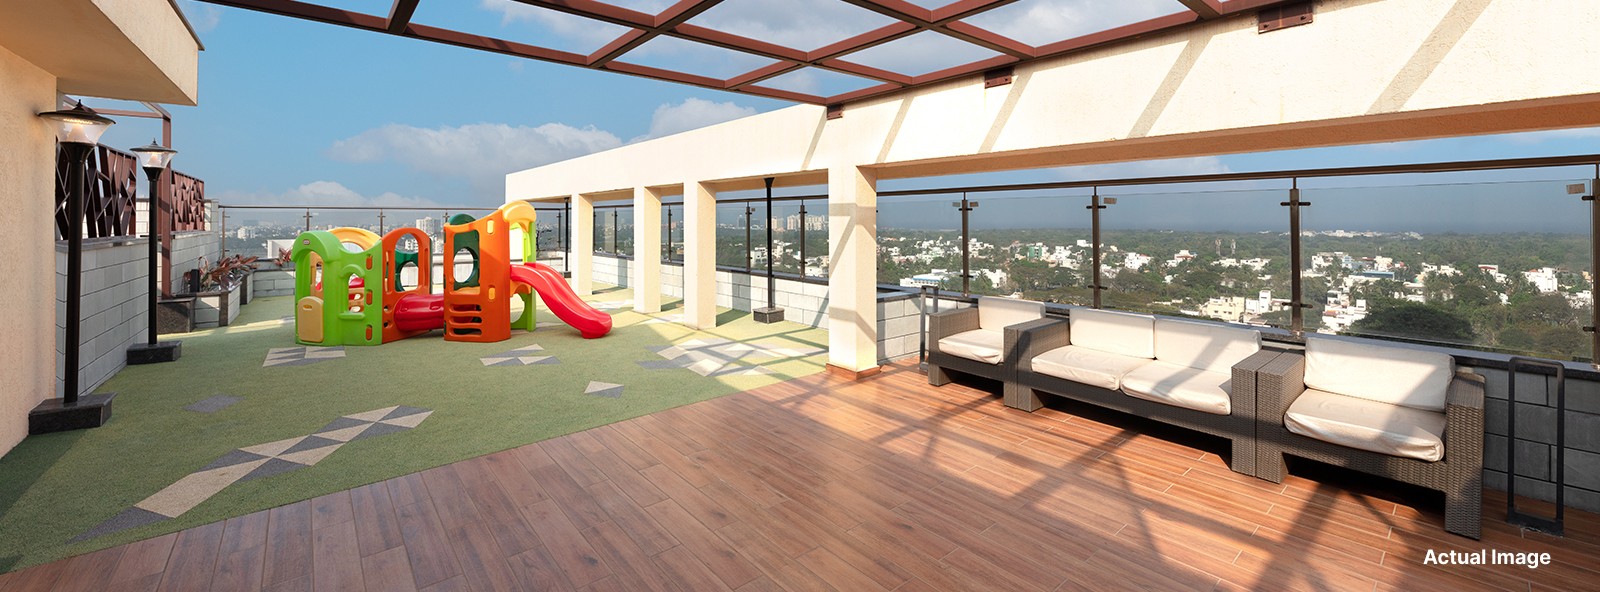 Kids' Play Area 2  - Tower of Adyar - Nahar Group